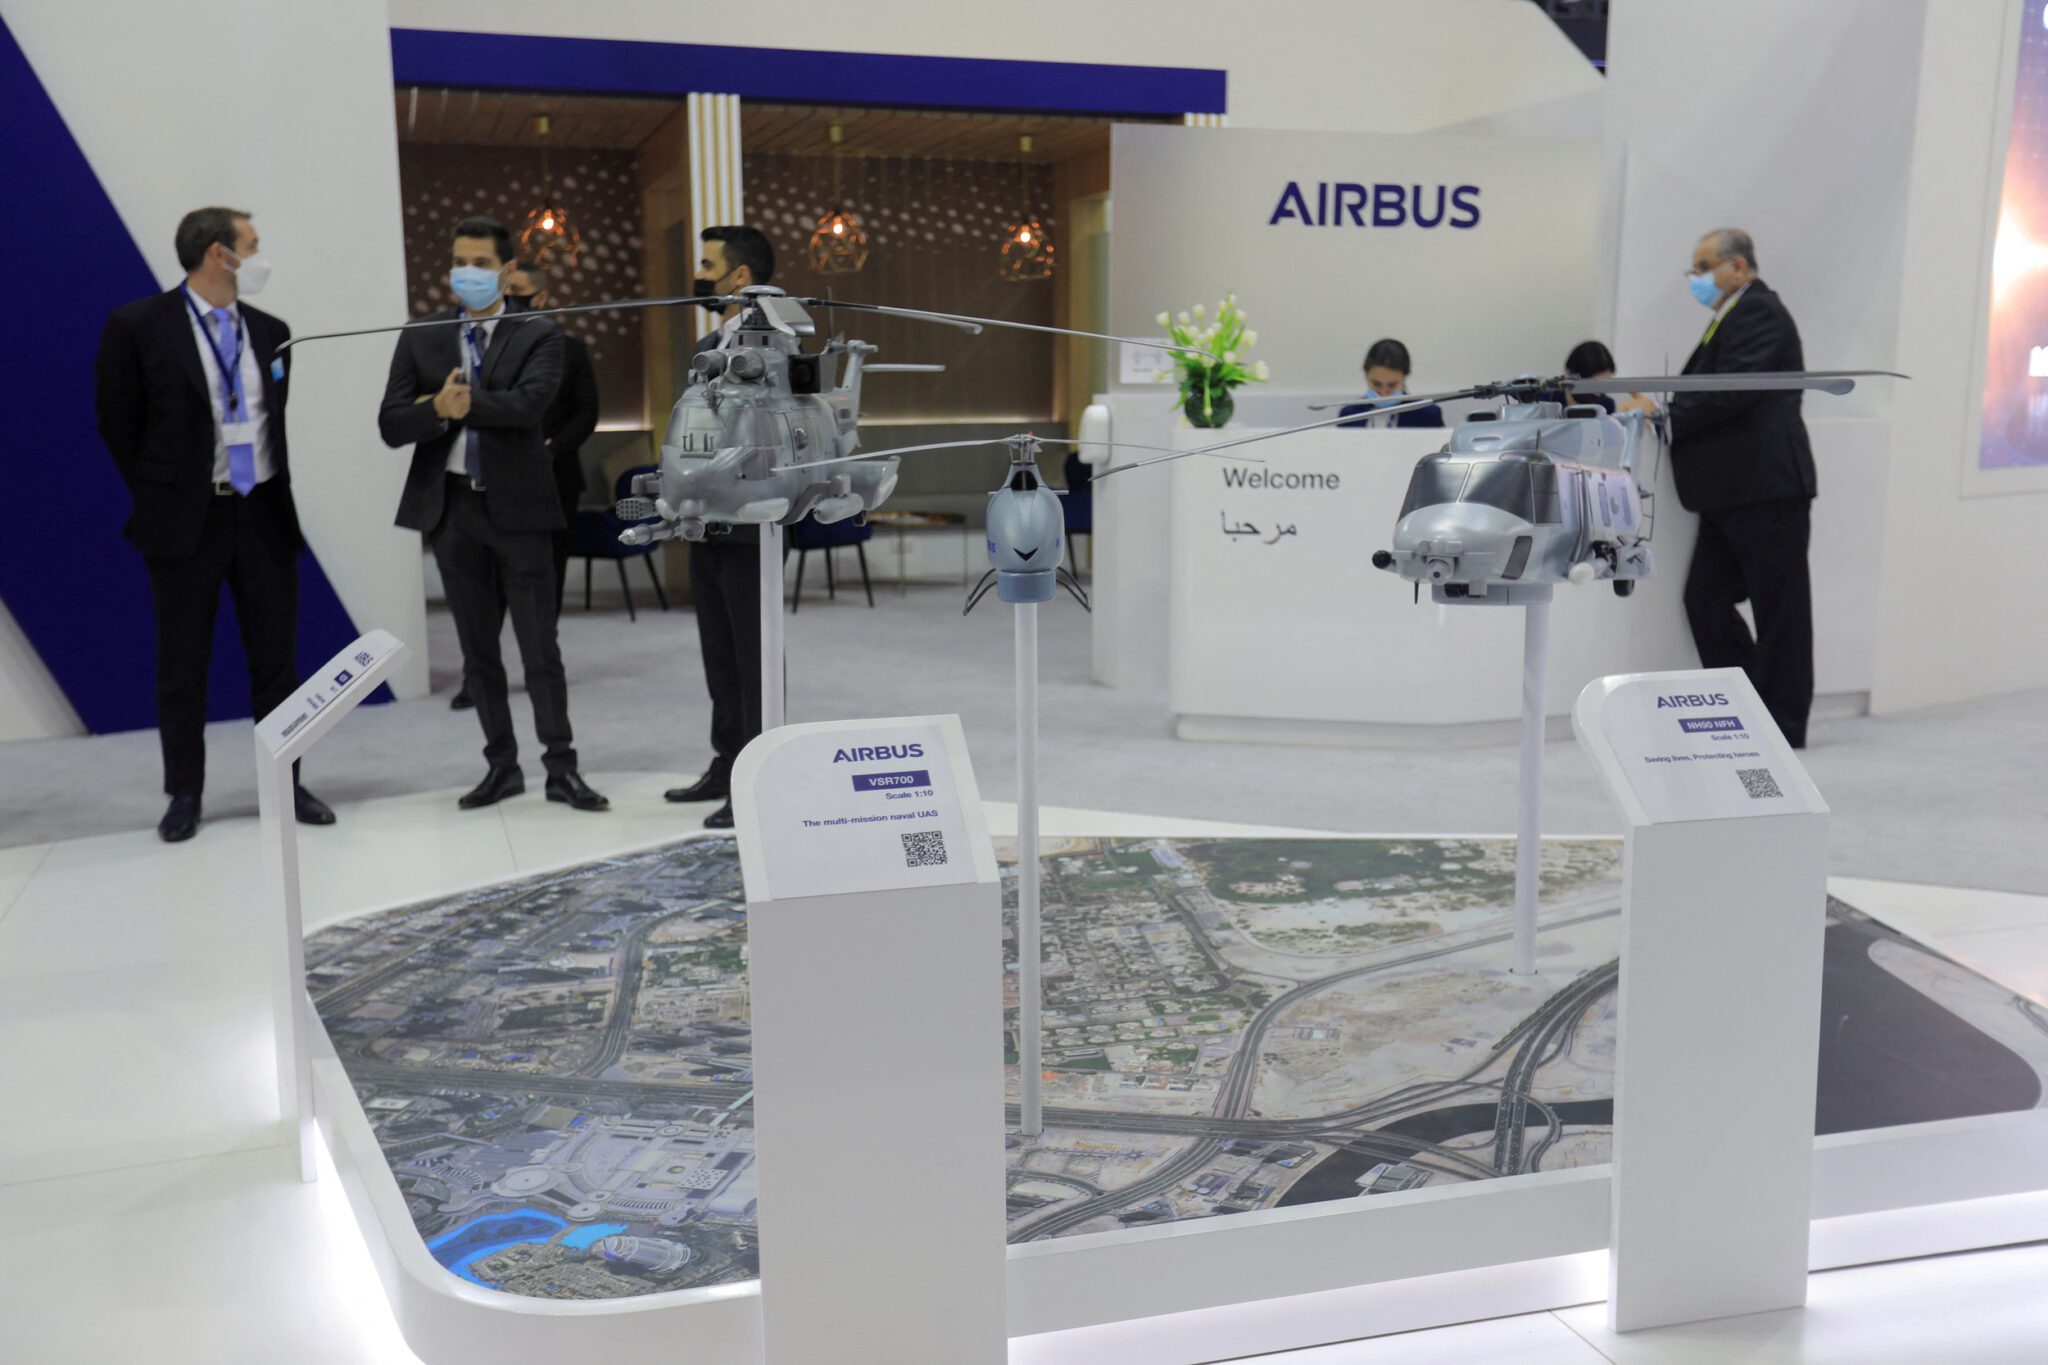 The show will see much deal-making for Airbus and Boeing. Source: Reuters